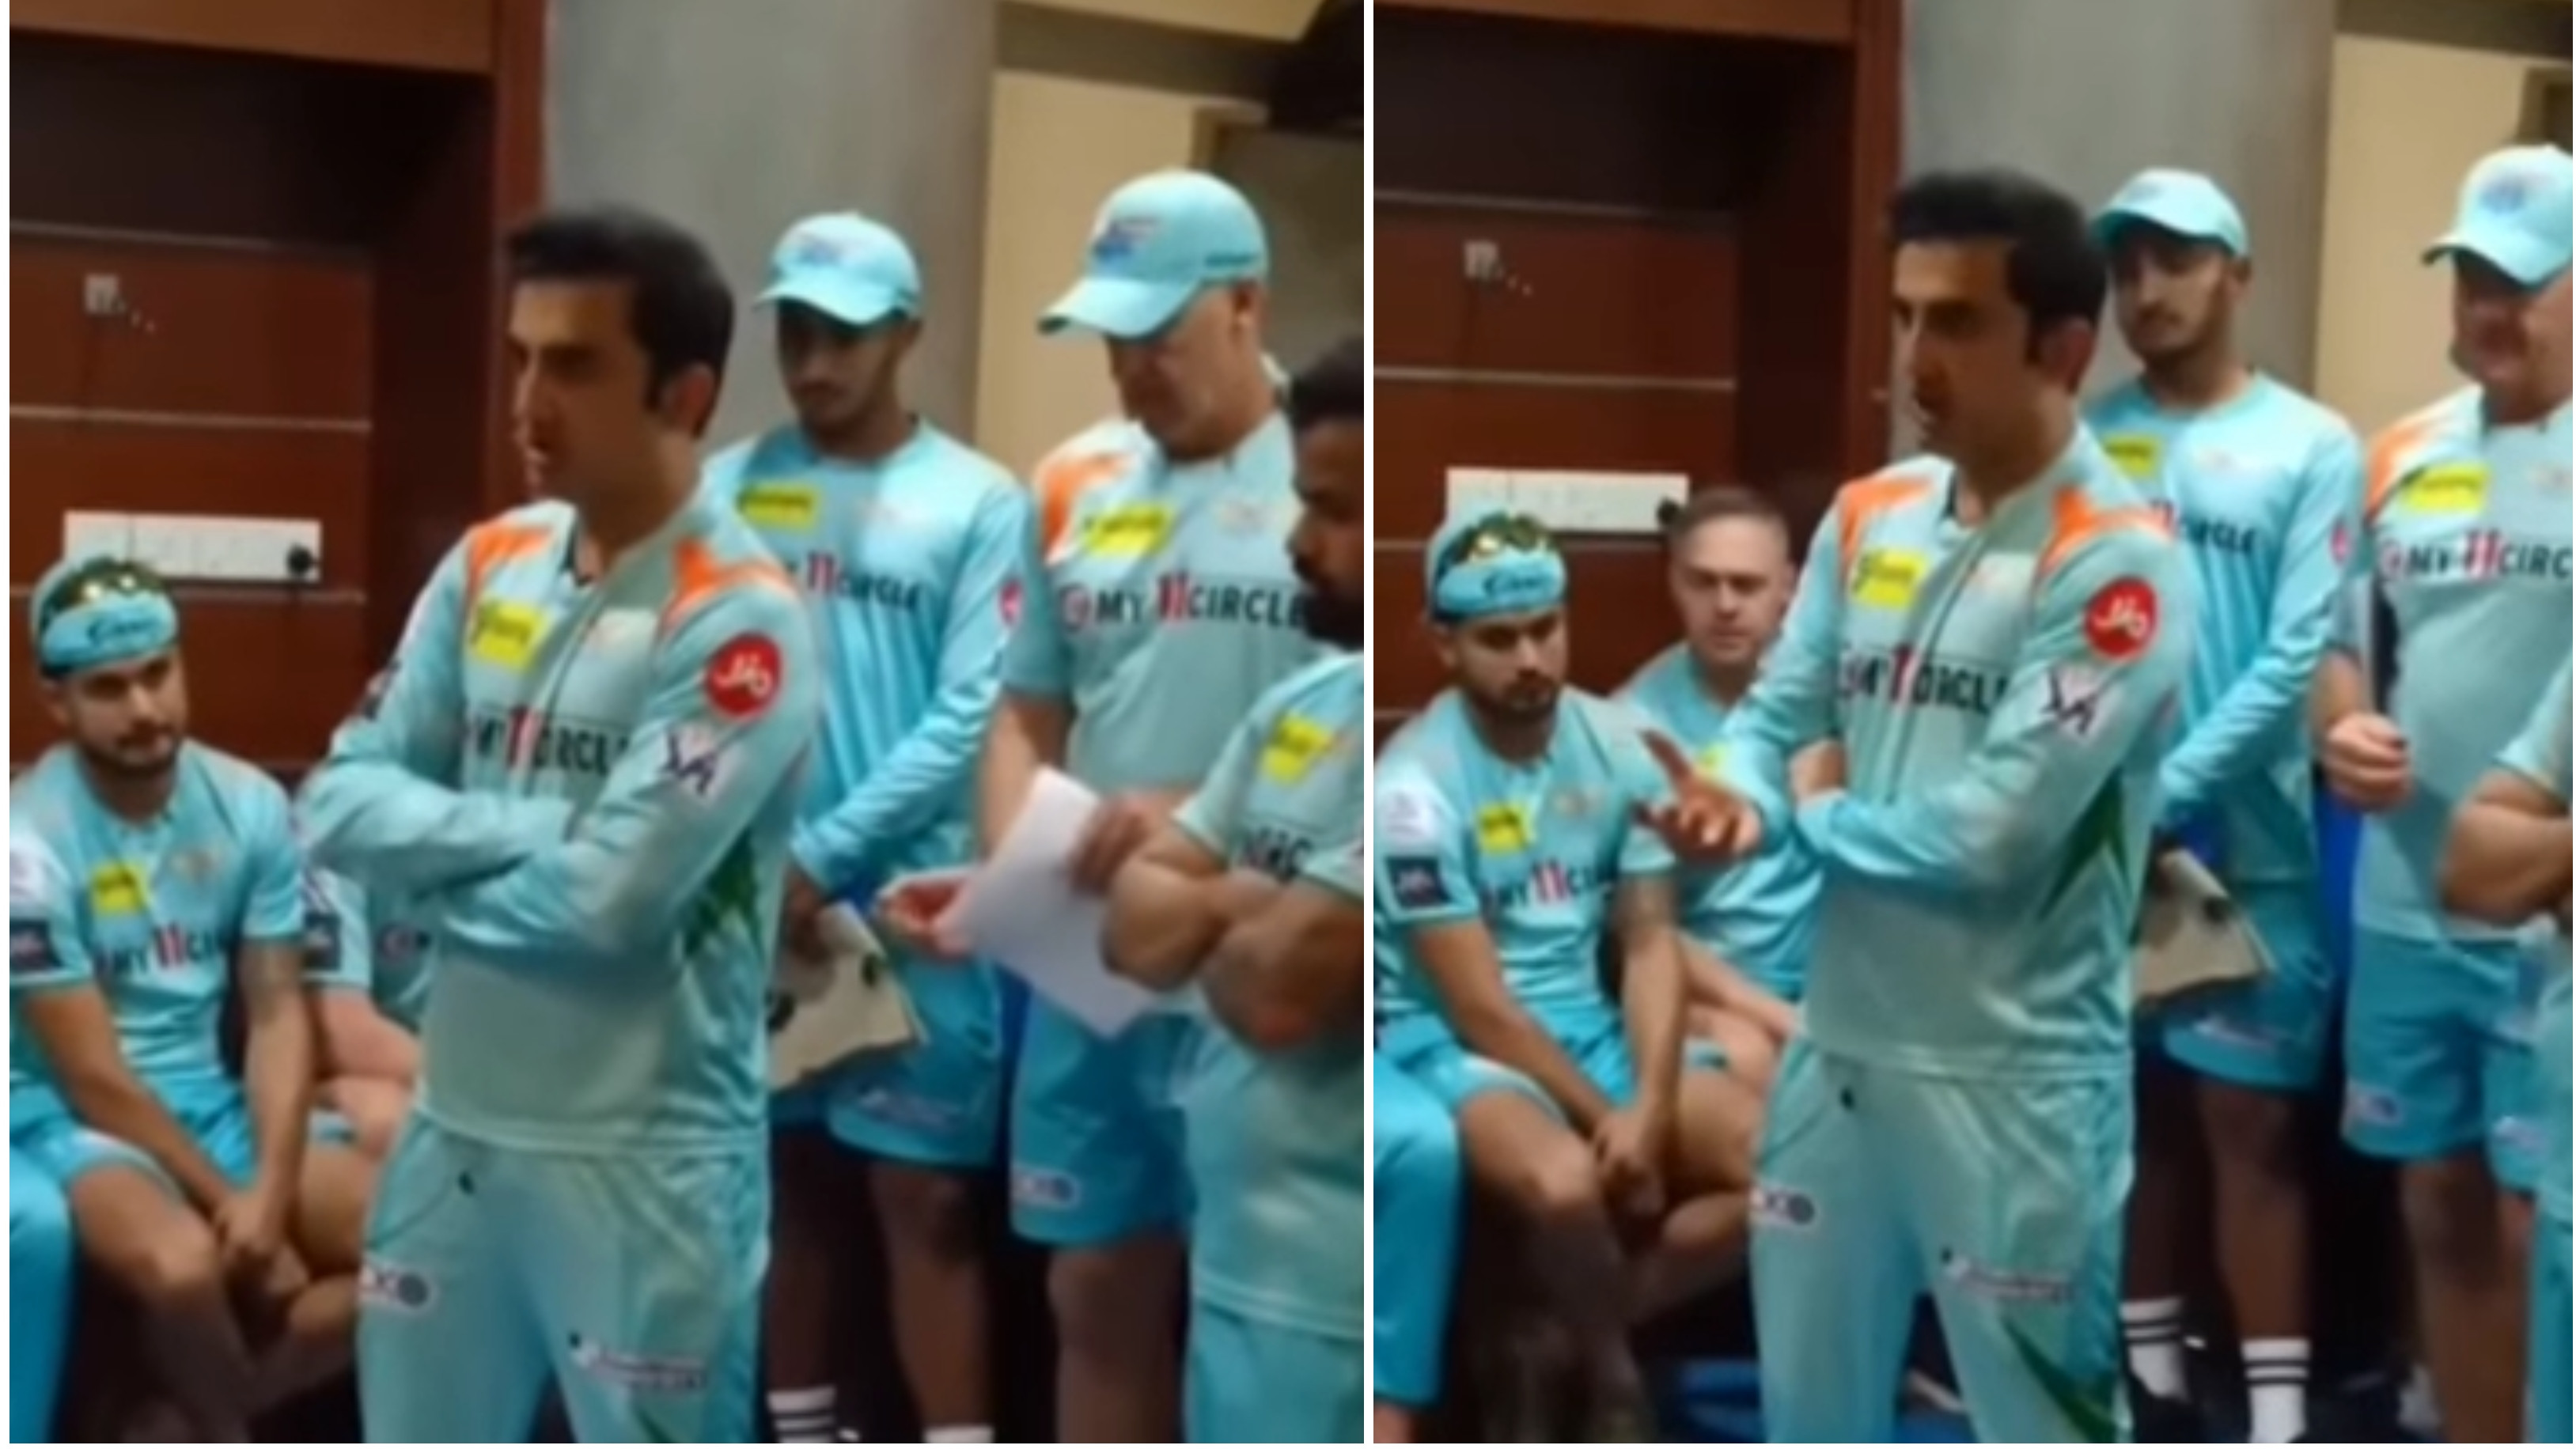 IPL 2022: WATCH – ‘I thought we gave up’, Gambhir’s blunt speech at LSG dressing room after big defeat to GT